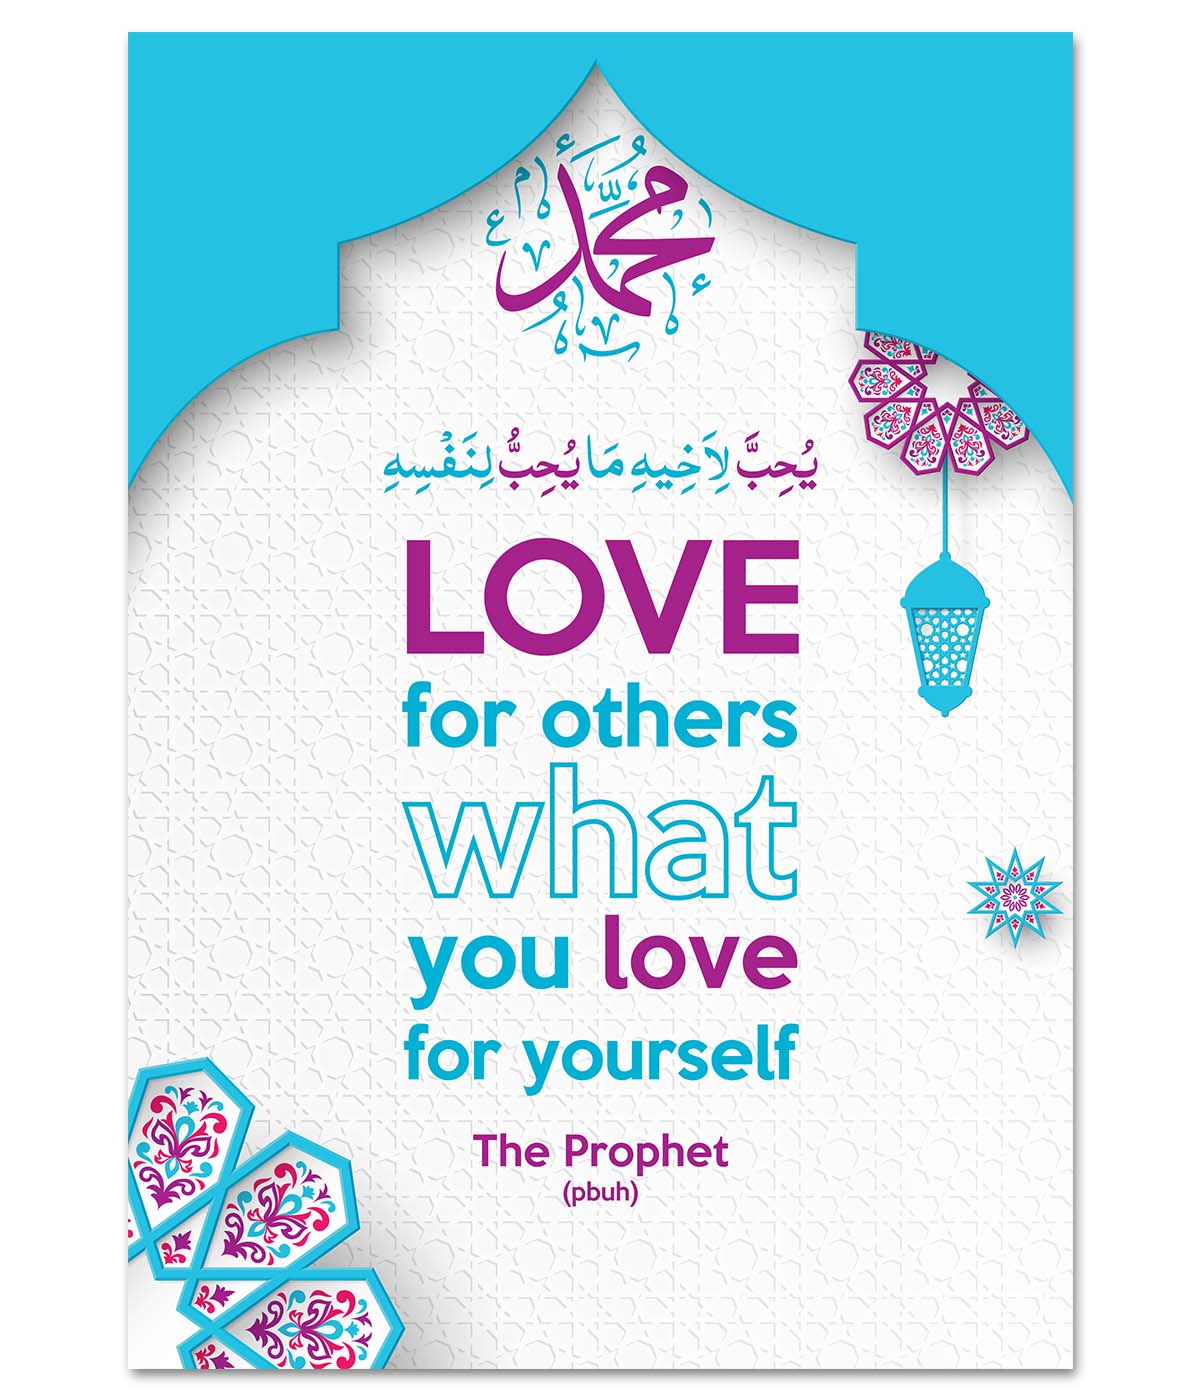 Love for Others What You Love for Yourself (digital)